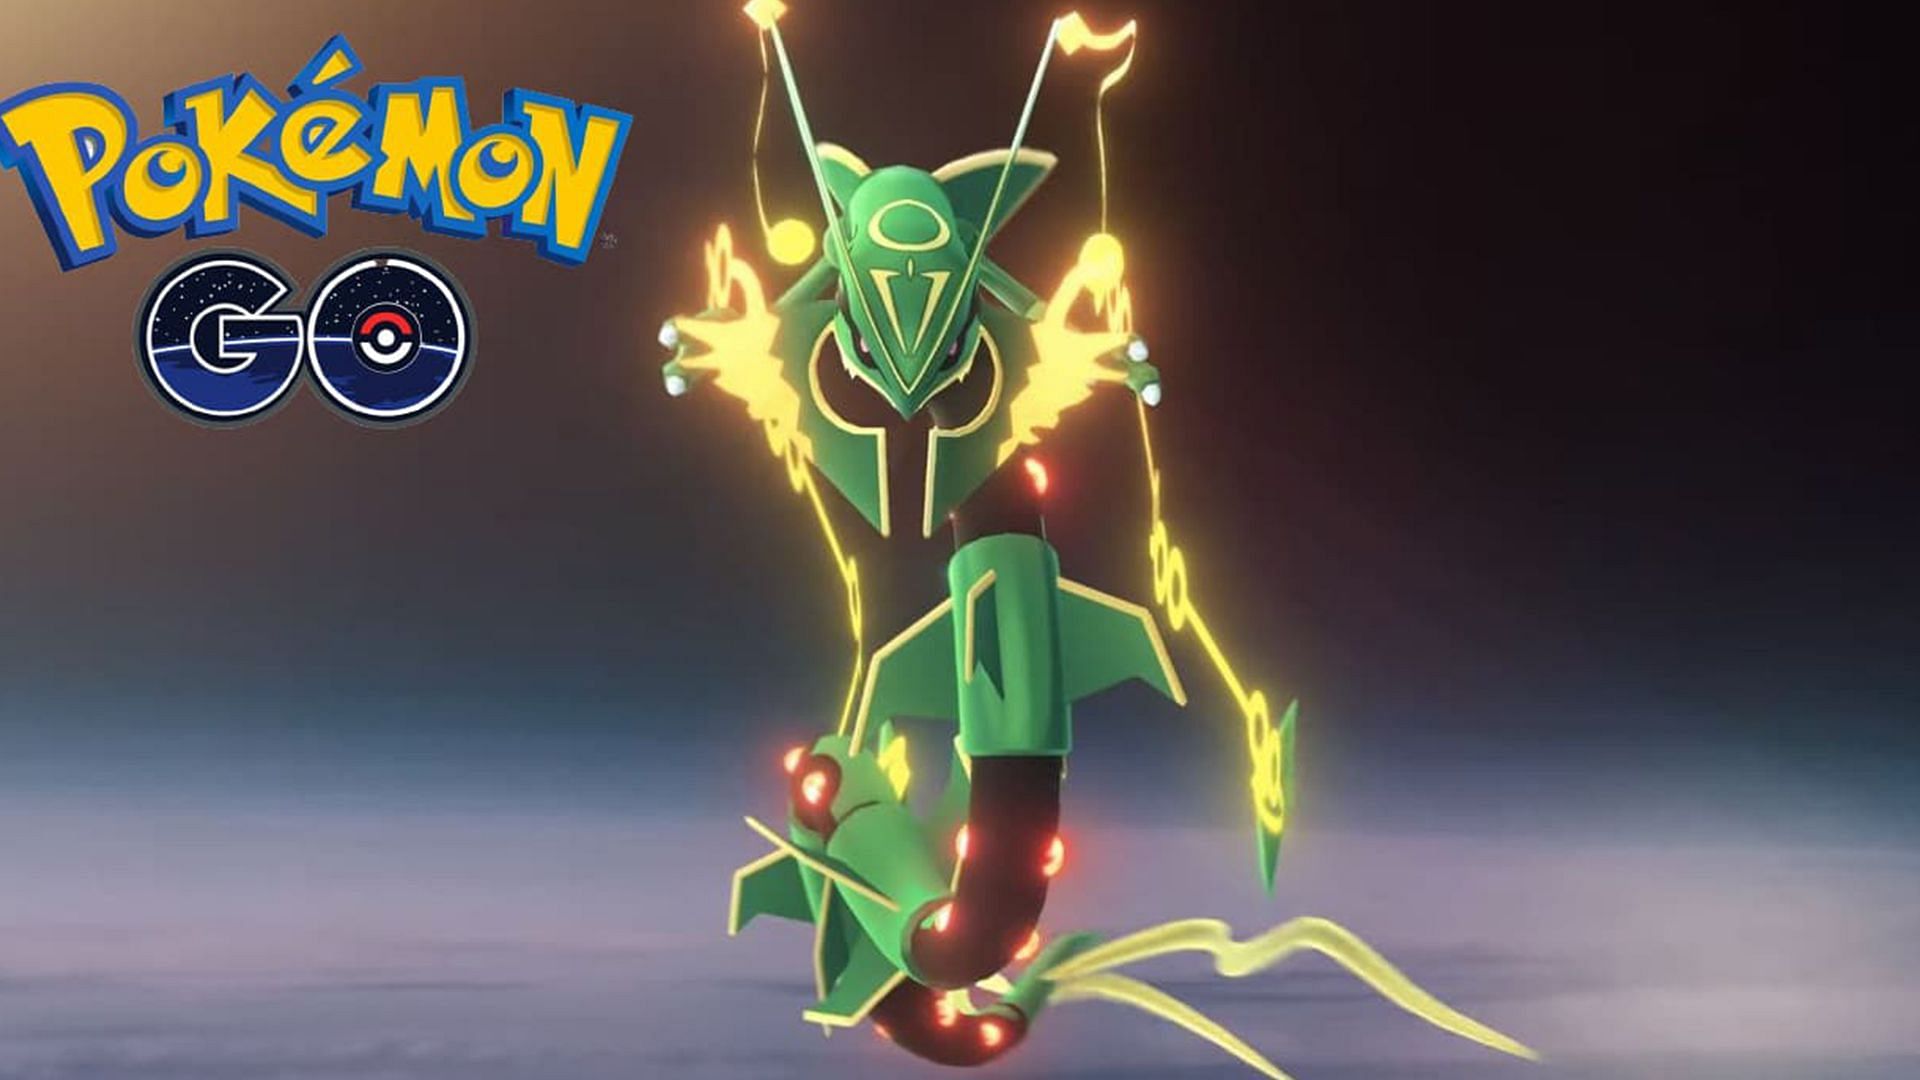 Mega Rayquaza is coming during the Pokemon GO Fest (Image via Niantic)